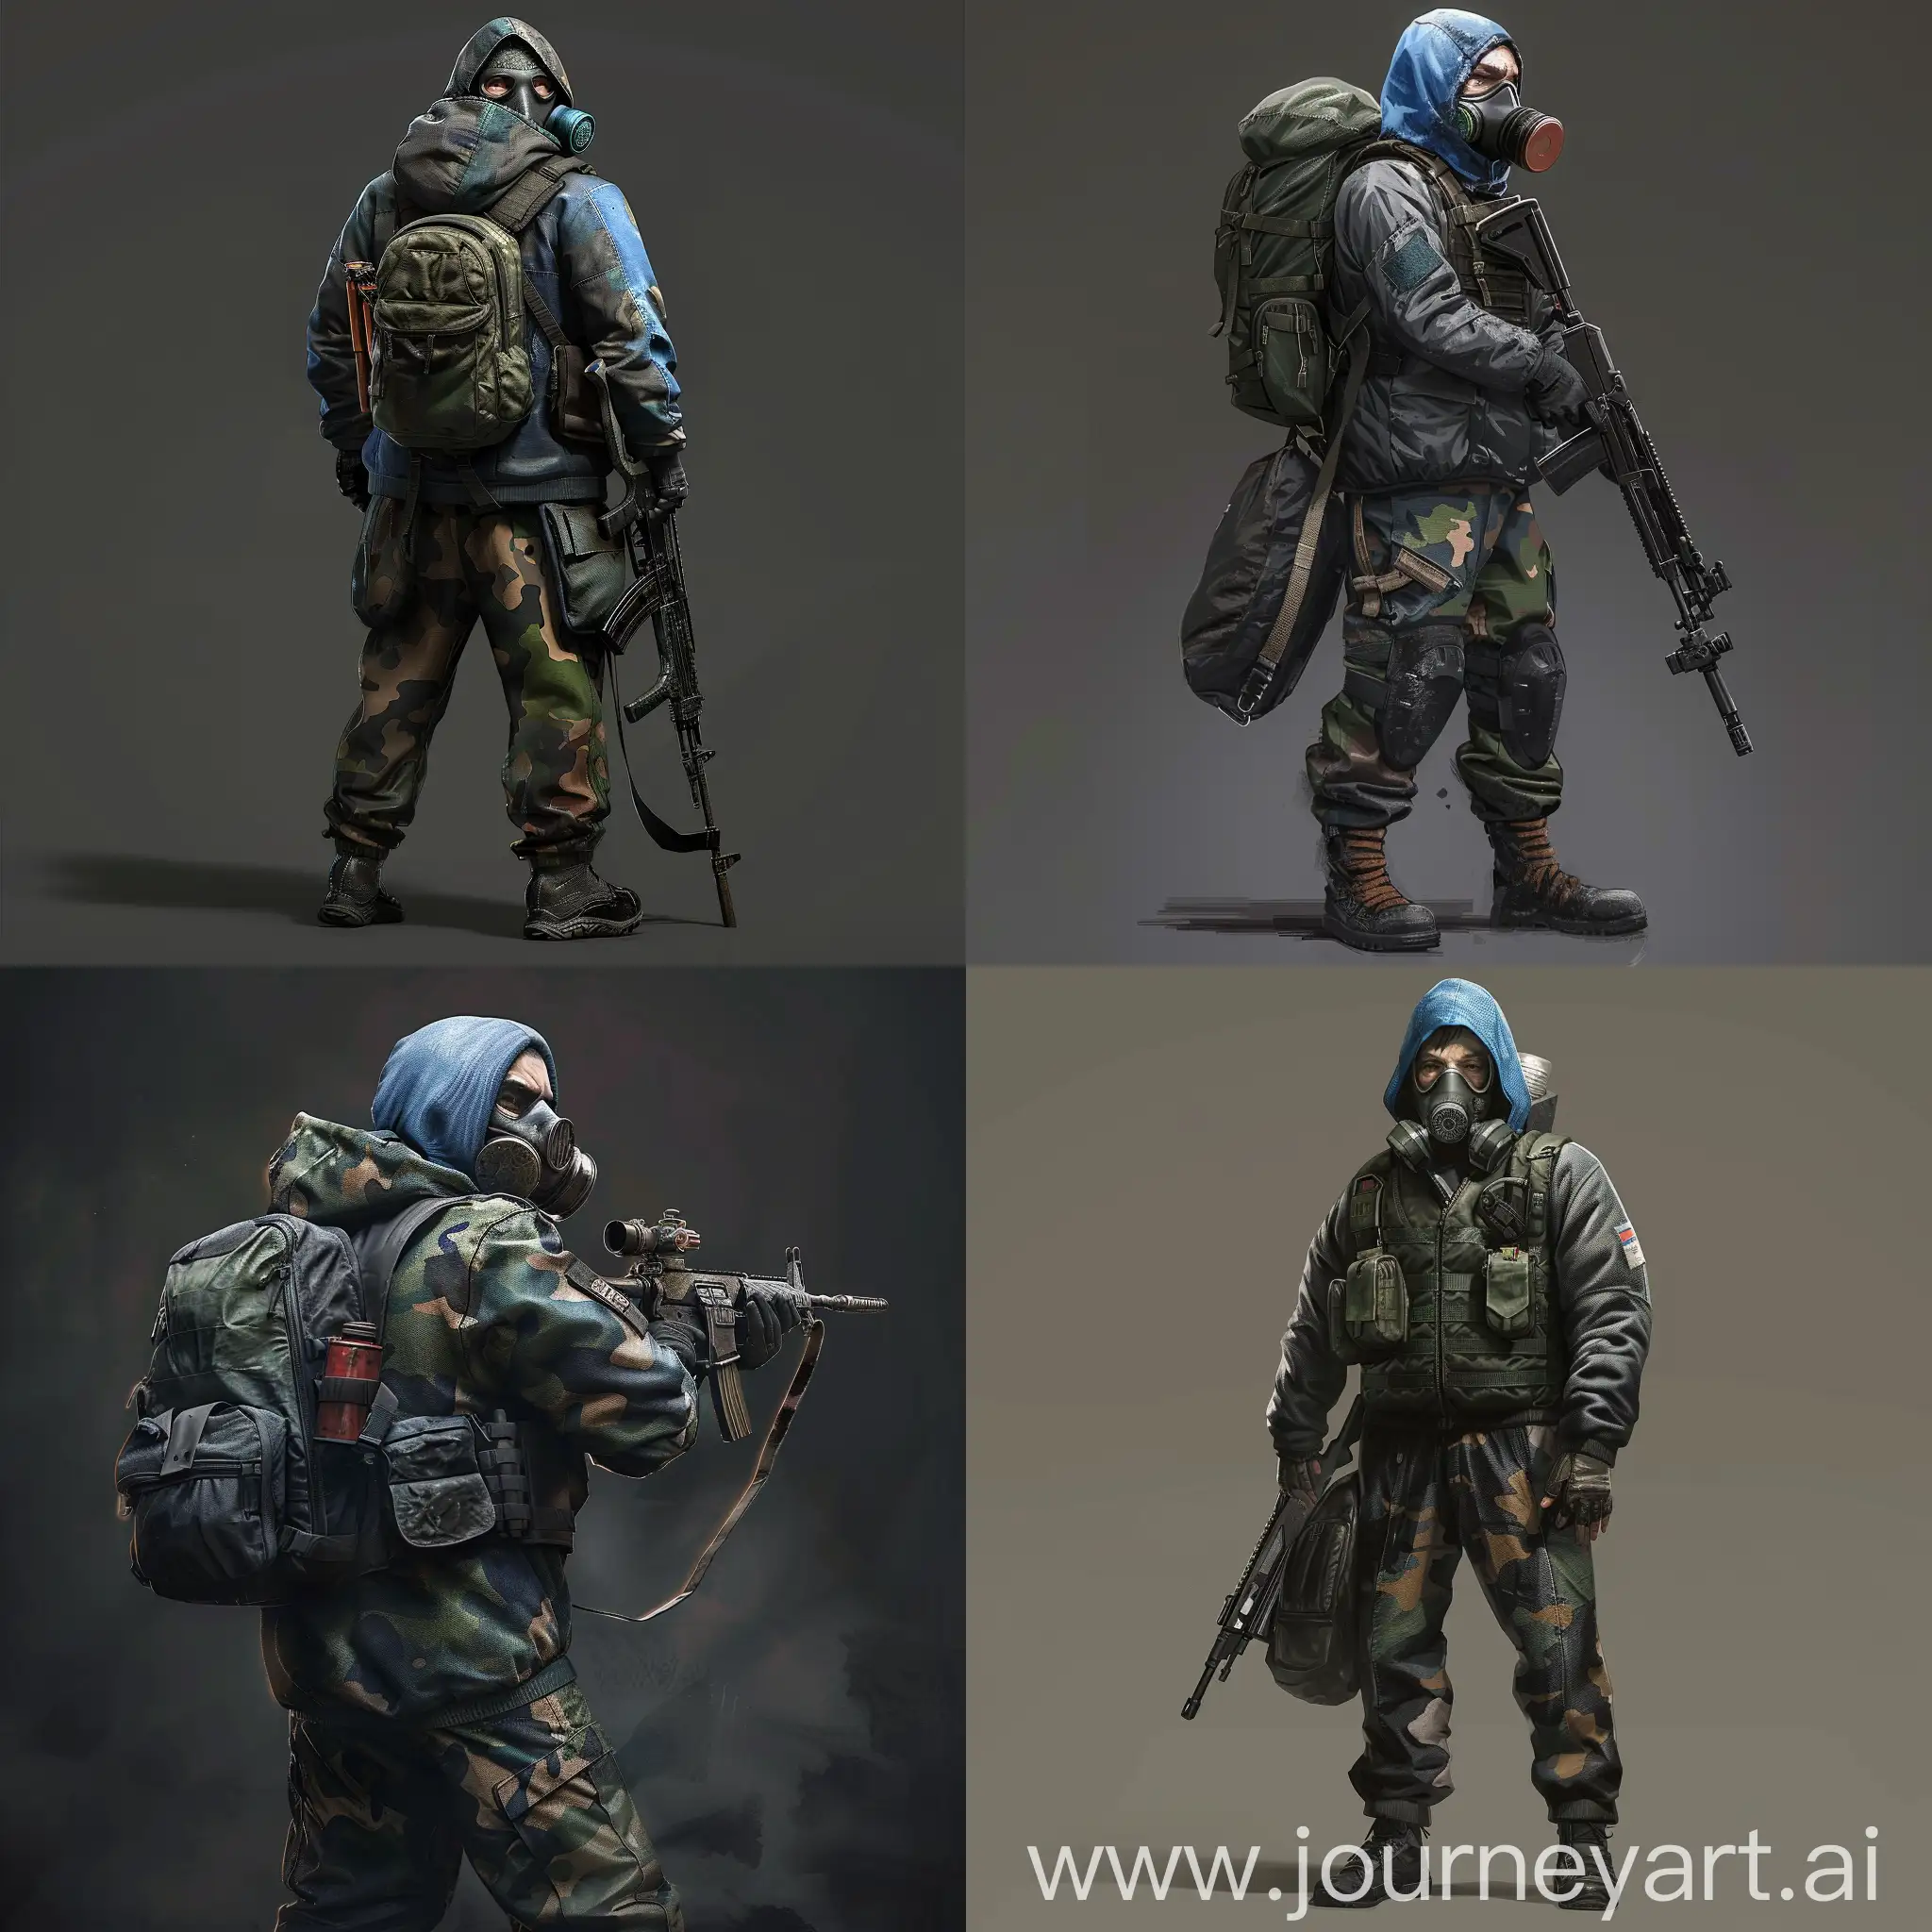 Stalker from the game "STALKER", a camouflage military jumpsuit, a gasmask on his face, a small military backpack on his back, military unloading on his body, a sniper rifle in his hands.